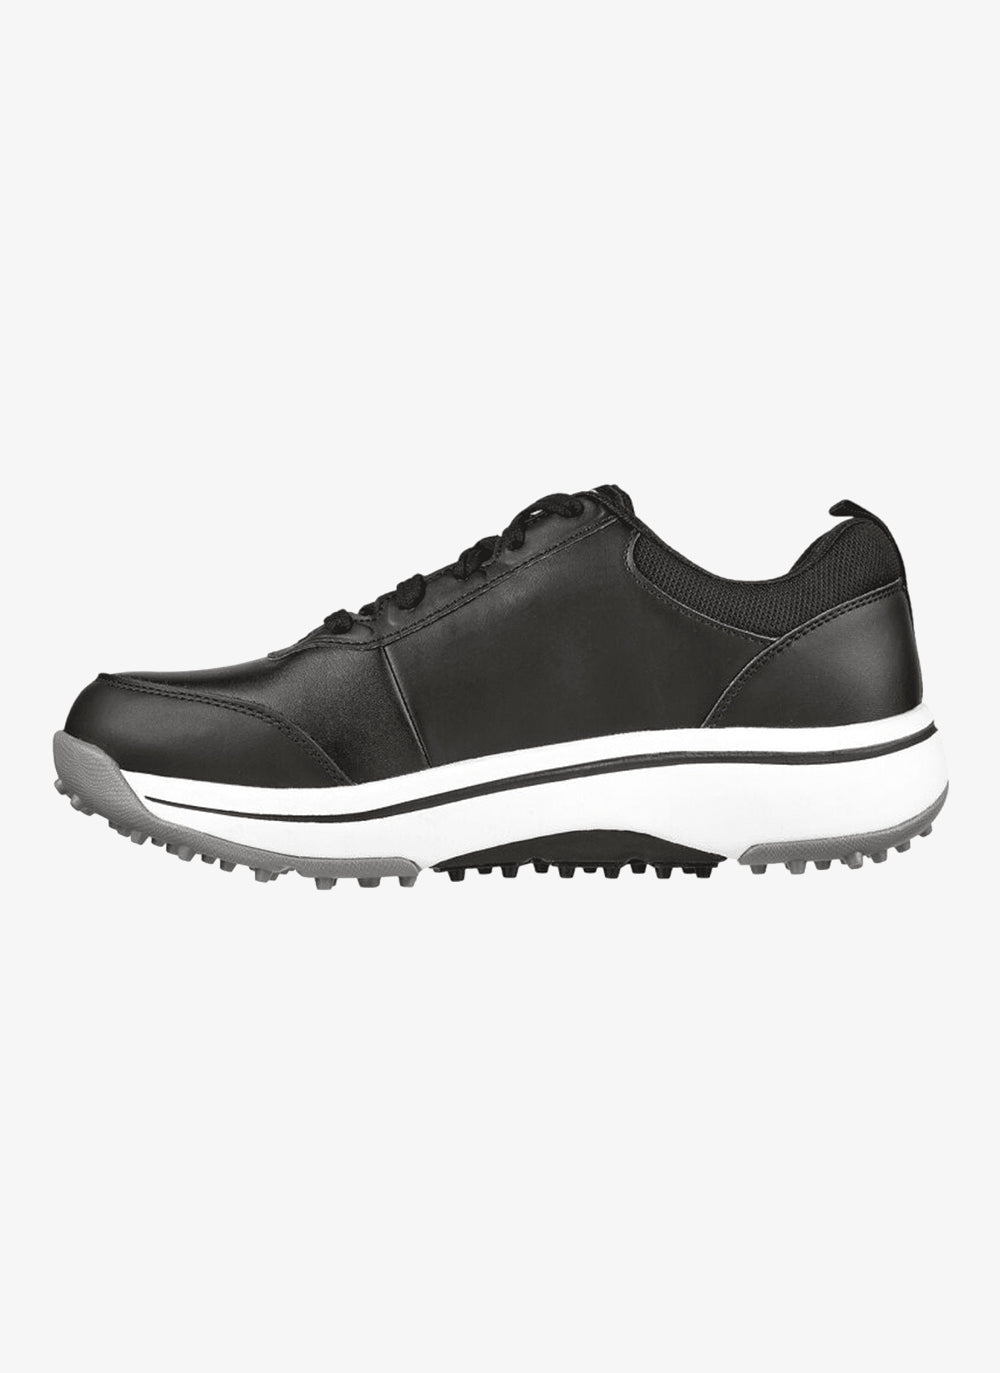 Skechers Arch Fit Set Up 3 Golf Shoes 214033